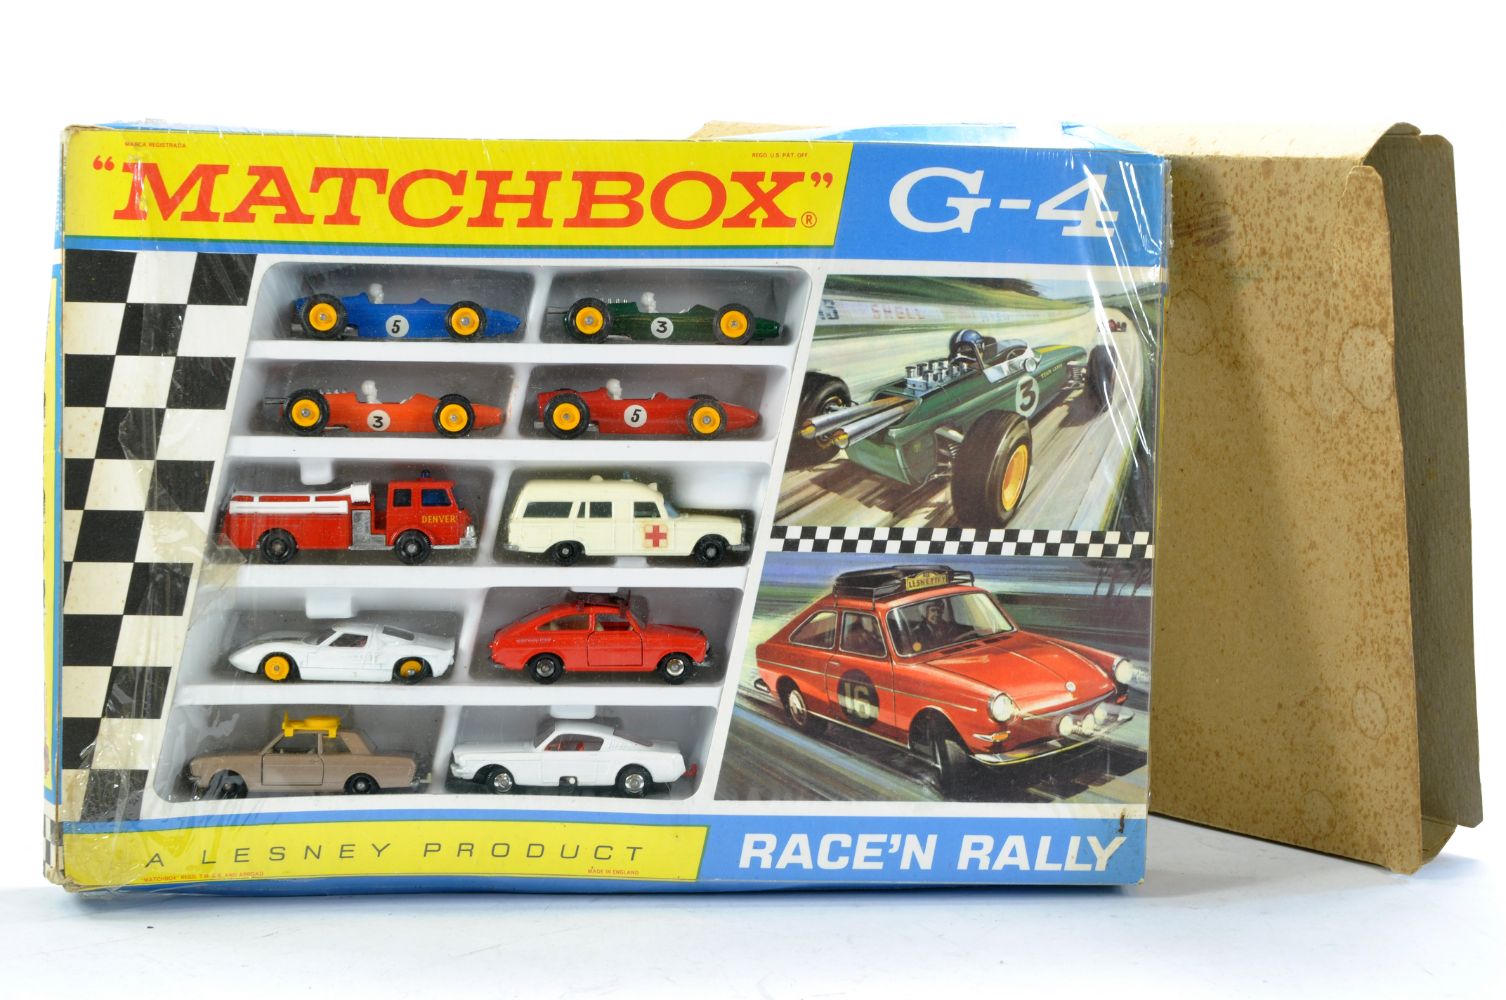 Specialist Toys, Models and Collectables Auction - Three Day Event